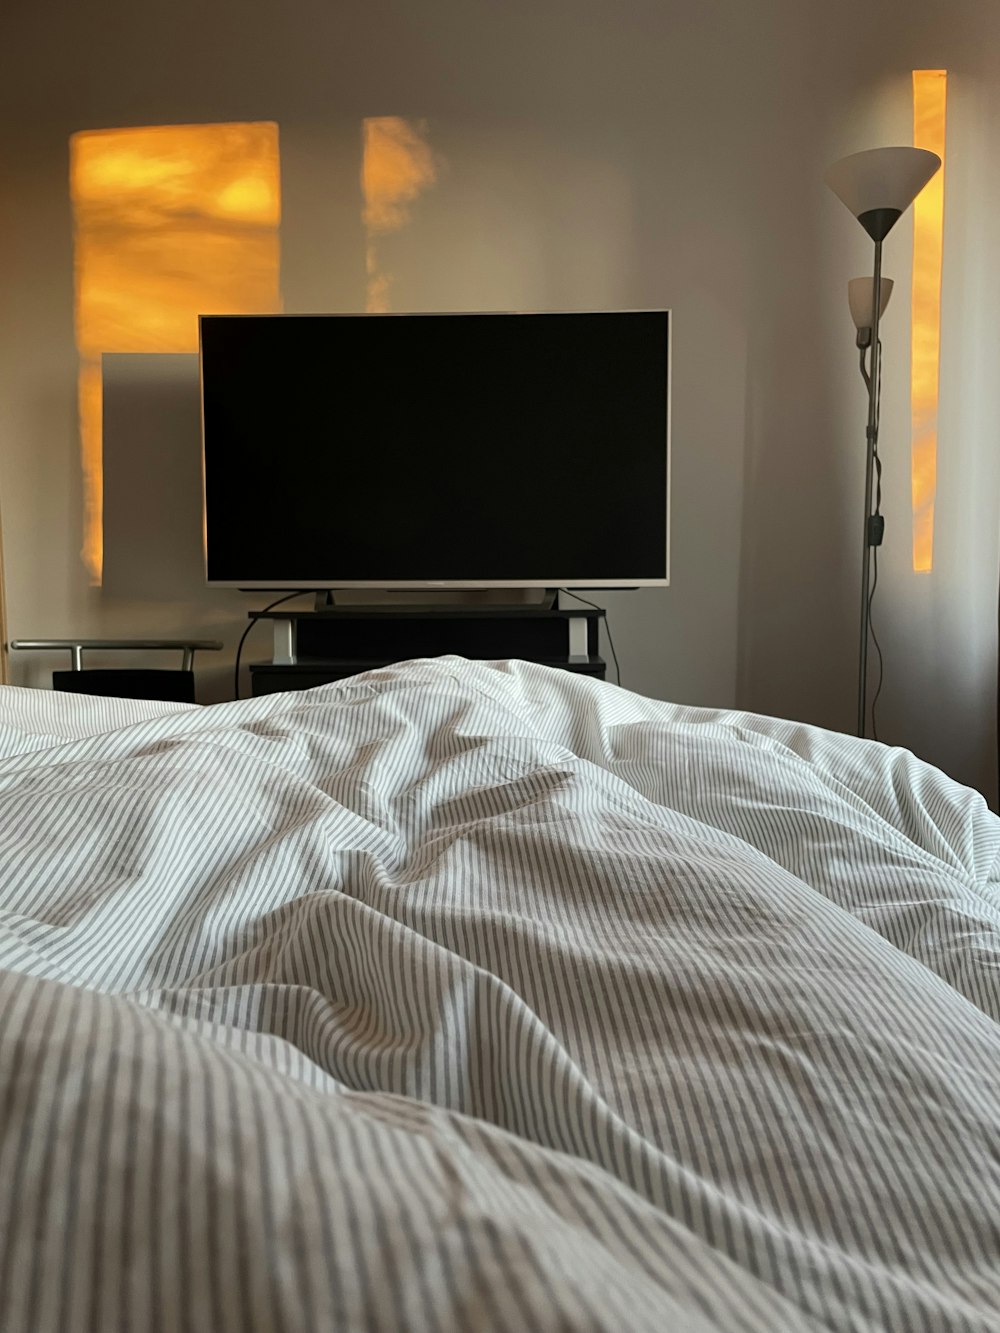 A bed with a white comforter and a flat screen tv photo – Free Romania  Image on Unsplash